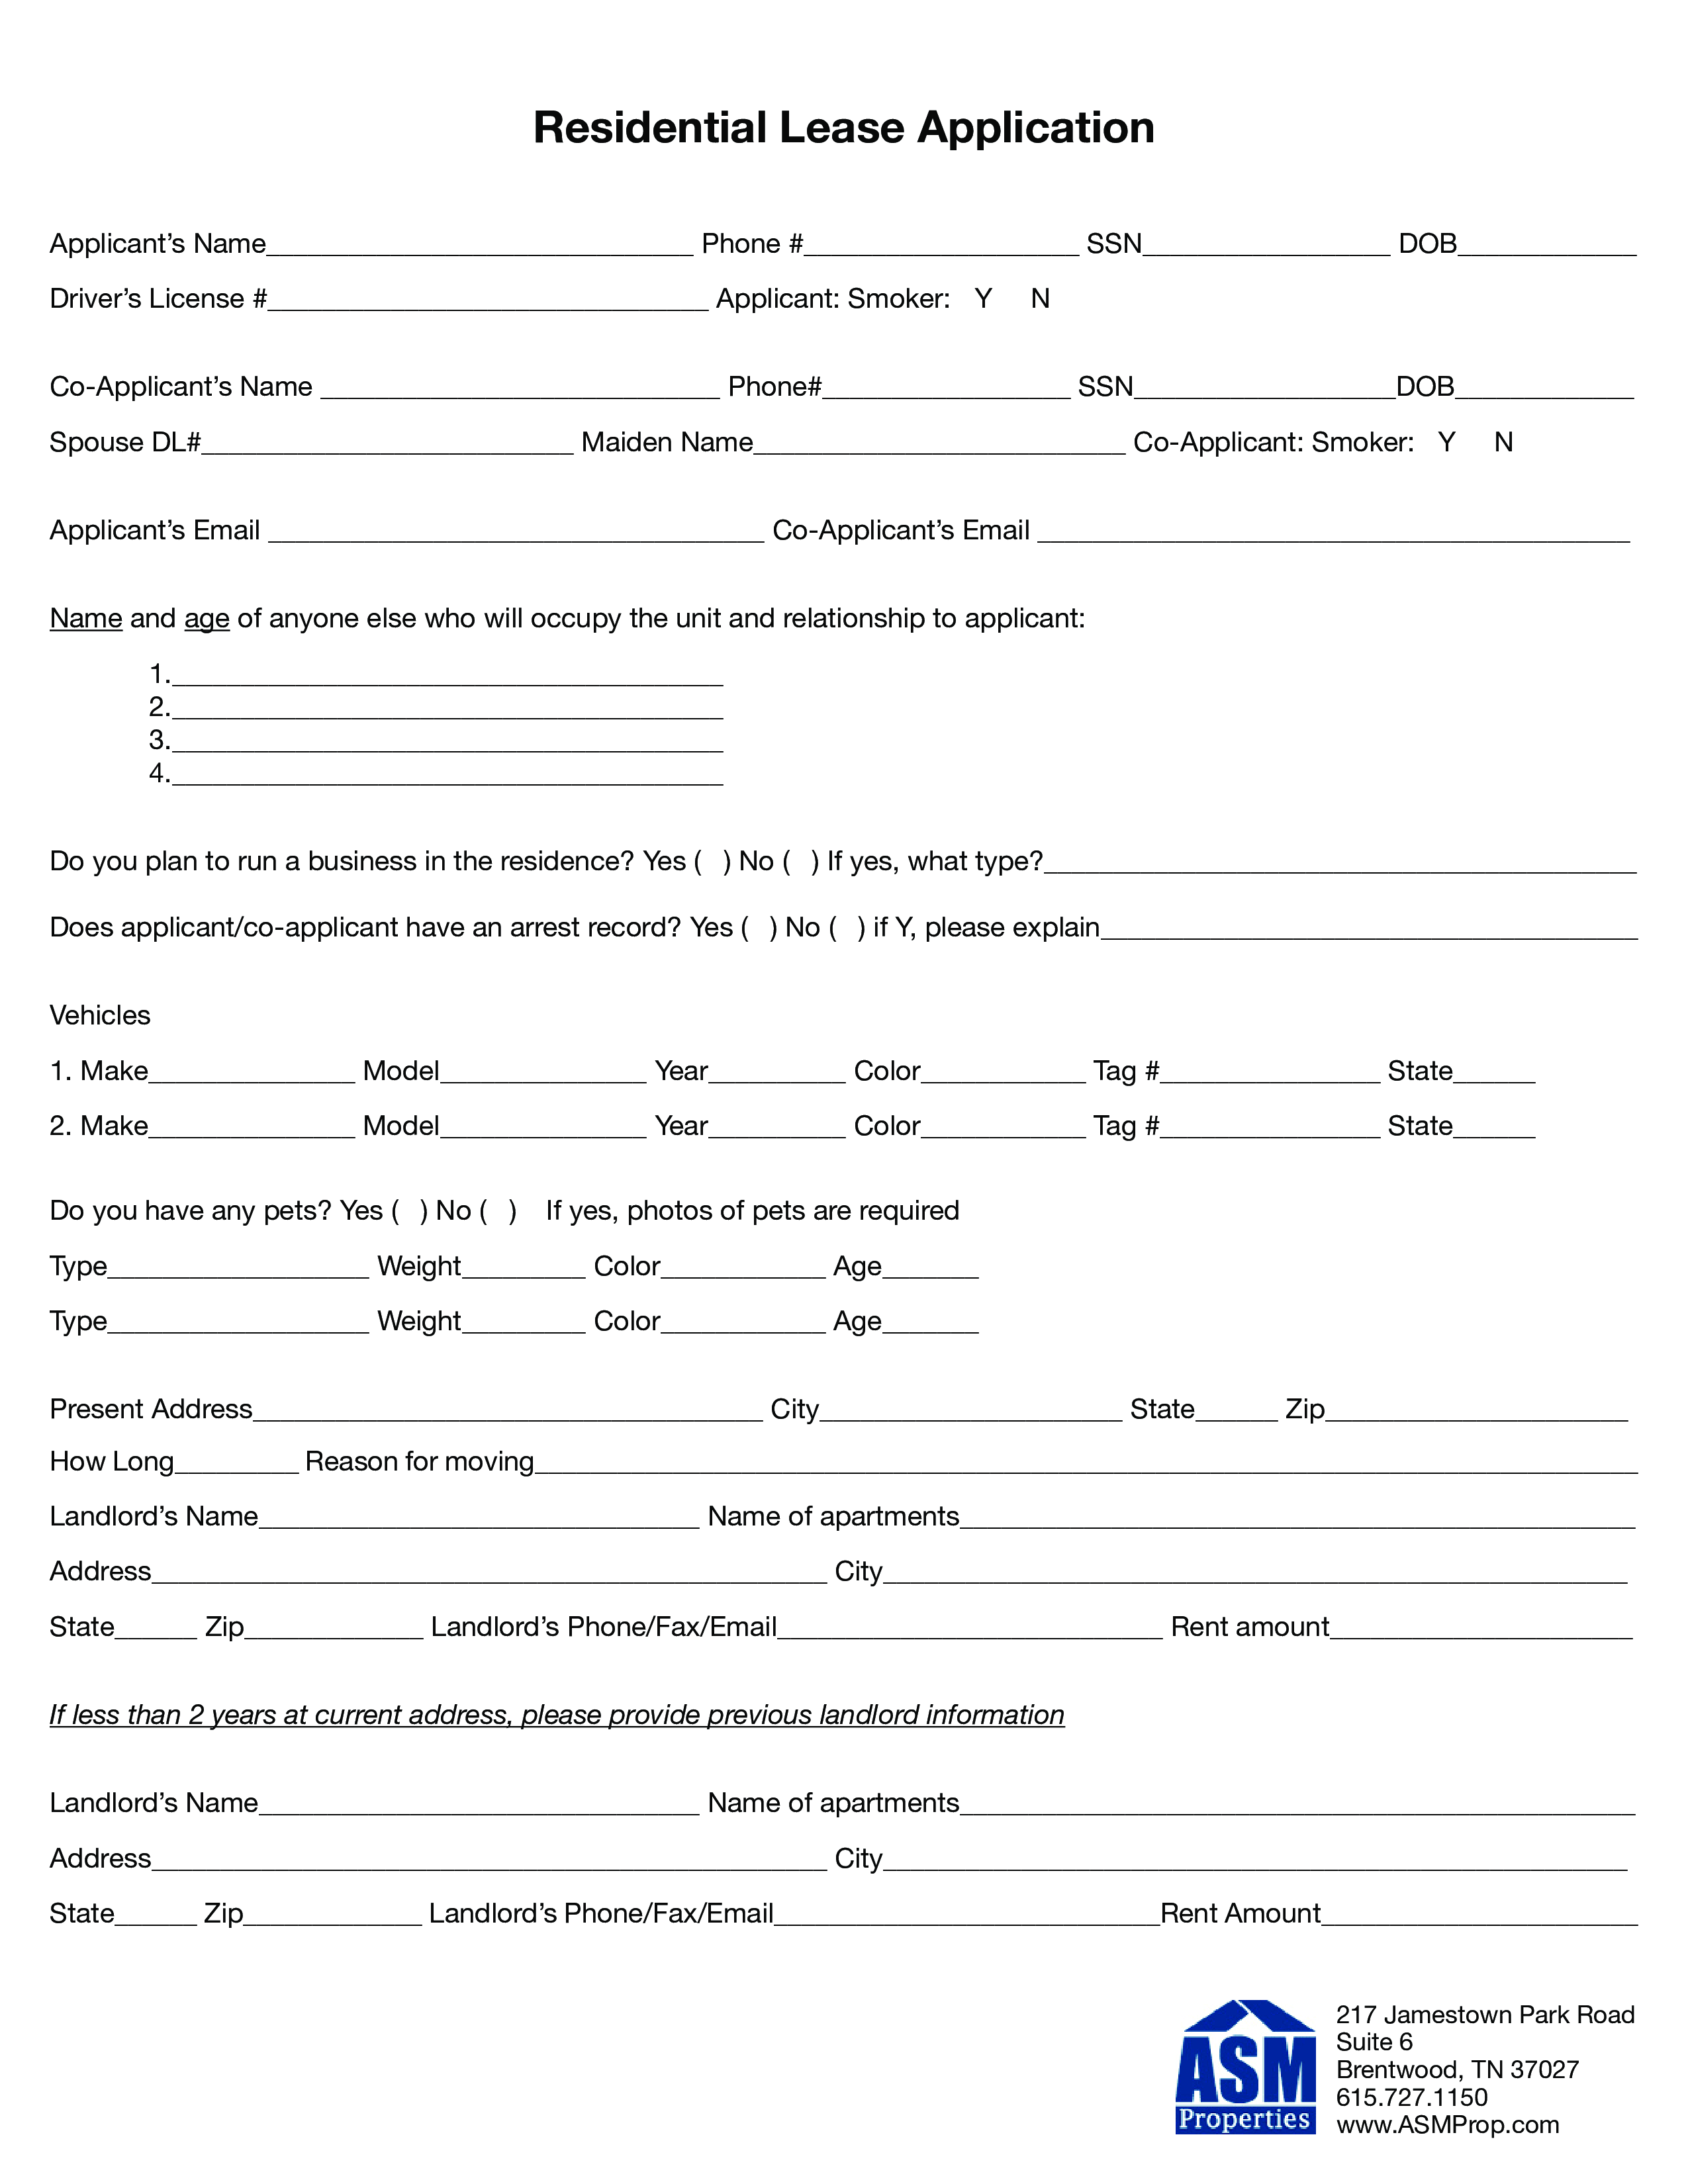 Residential Lease Application Form example main image